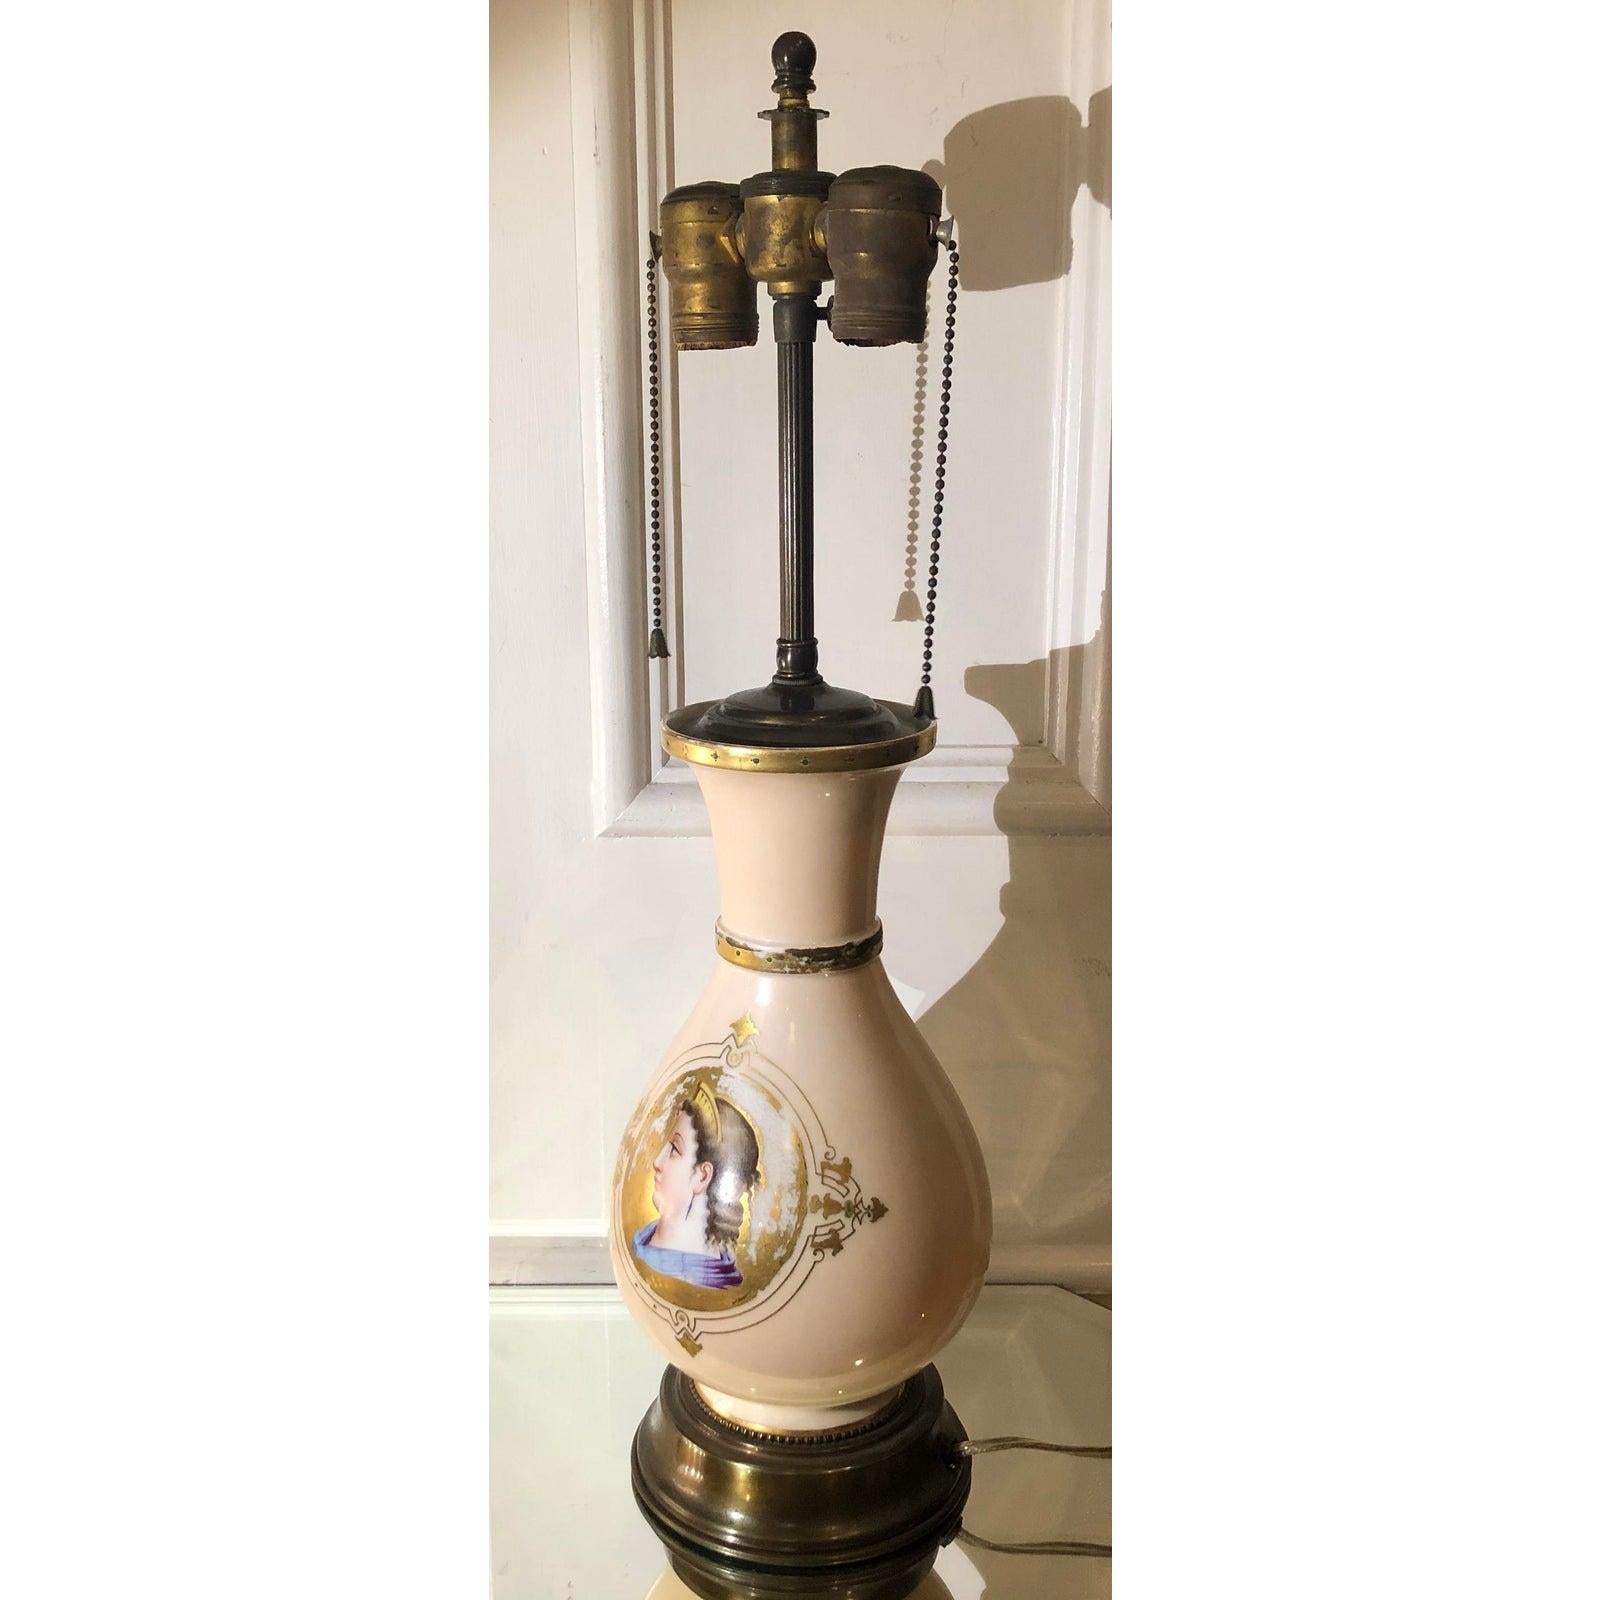 Antique Old Paris Porcelain Neoclassical Portrait Lamp - Vase c.1850 later electrified

Additional information:
Materials: Porcelain
Color: Tan
Brand: Old Paris
Period: 19th Century
Place of Origin: France
Styles: Neoclassical
Lamp Shade: Not